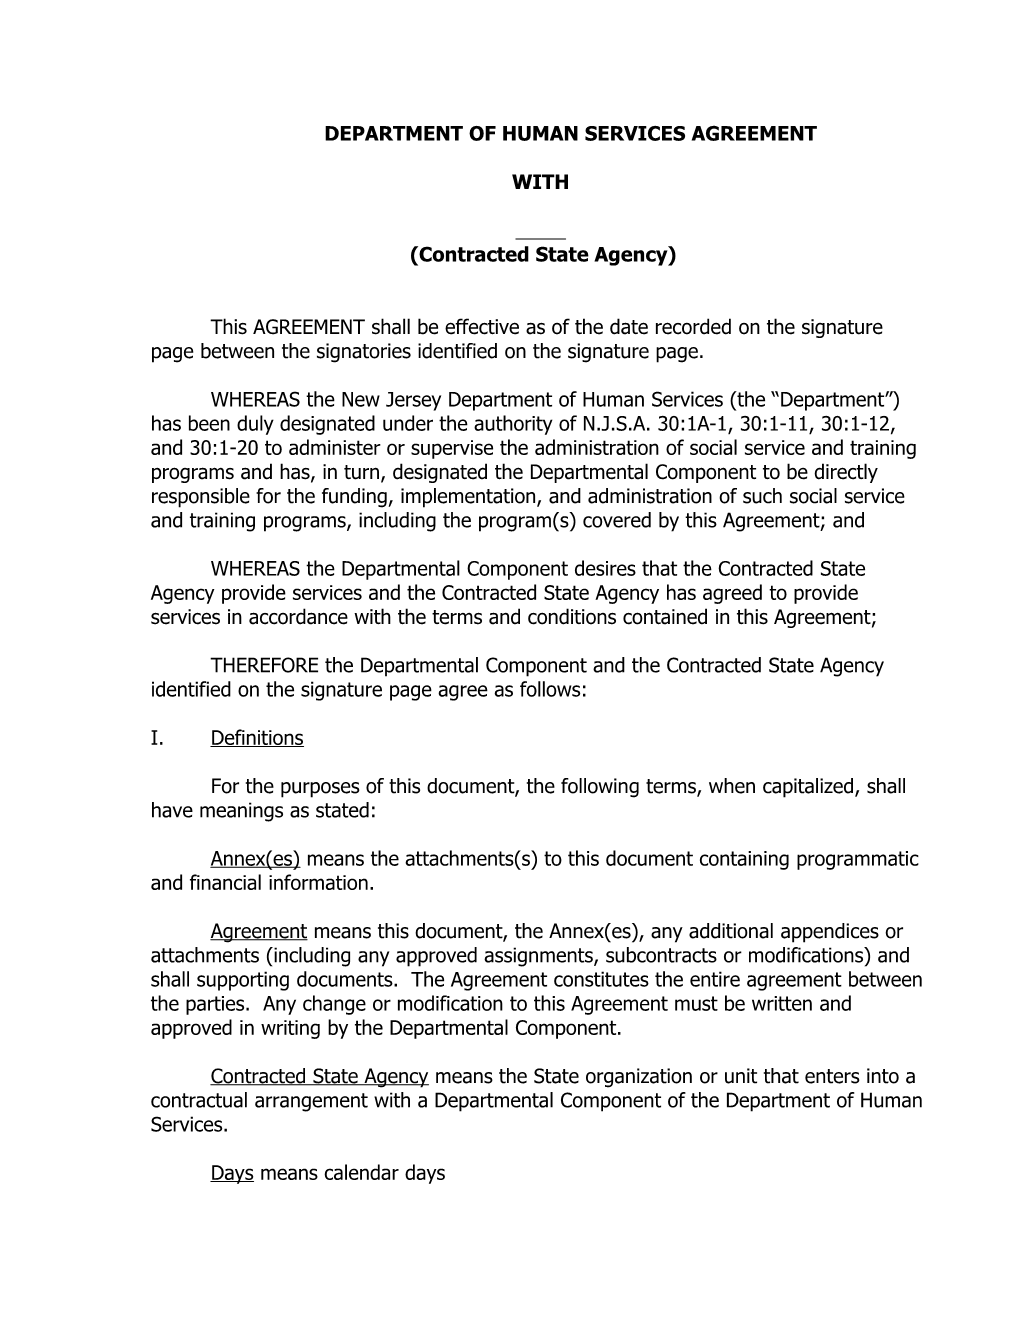 Department of Human Services Agreement s1